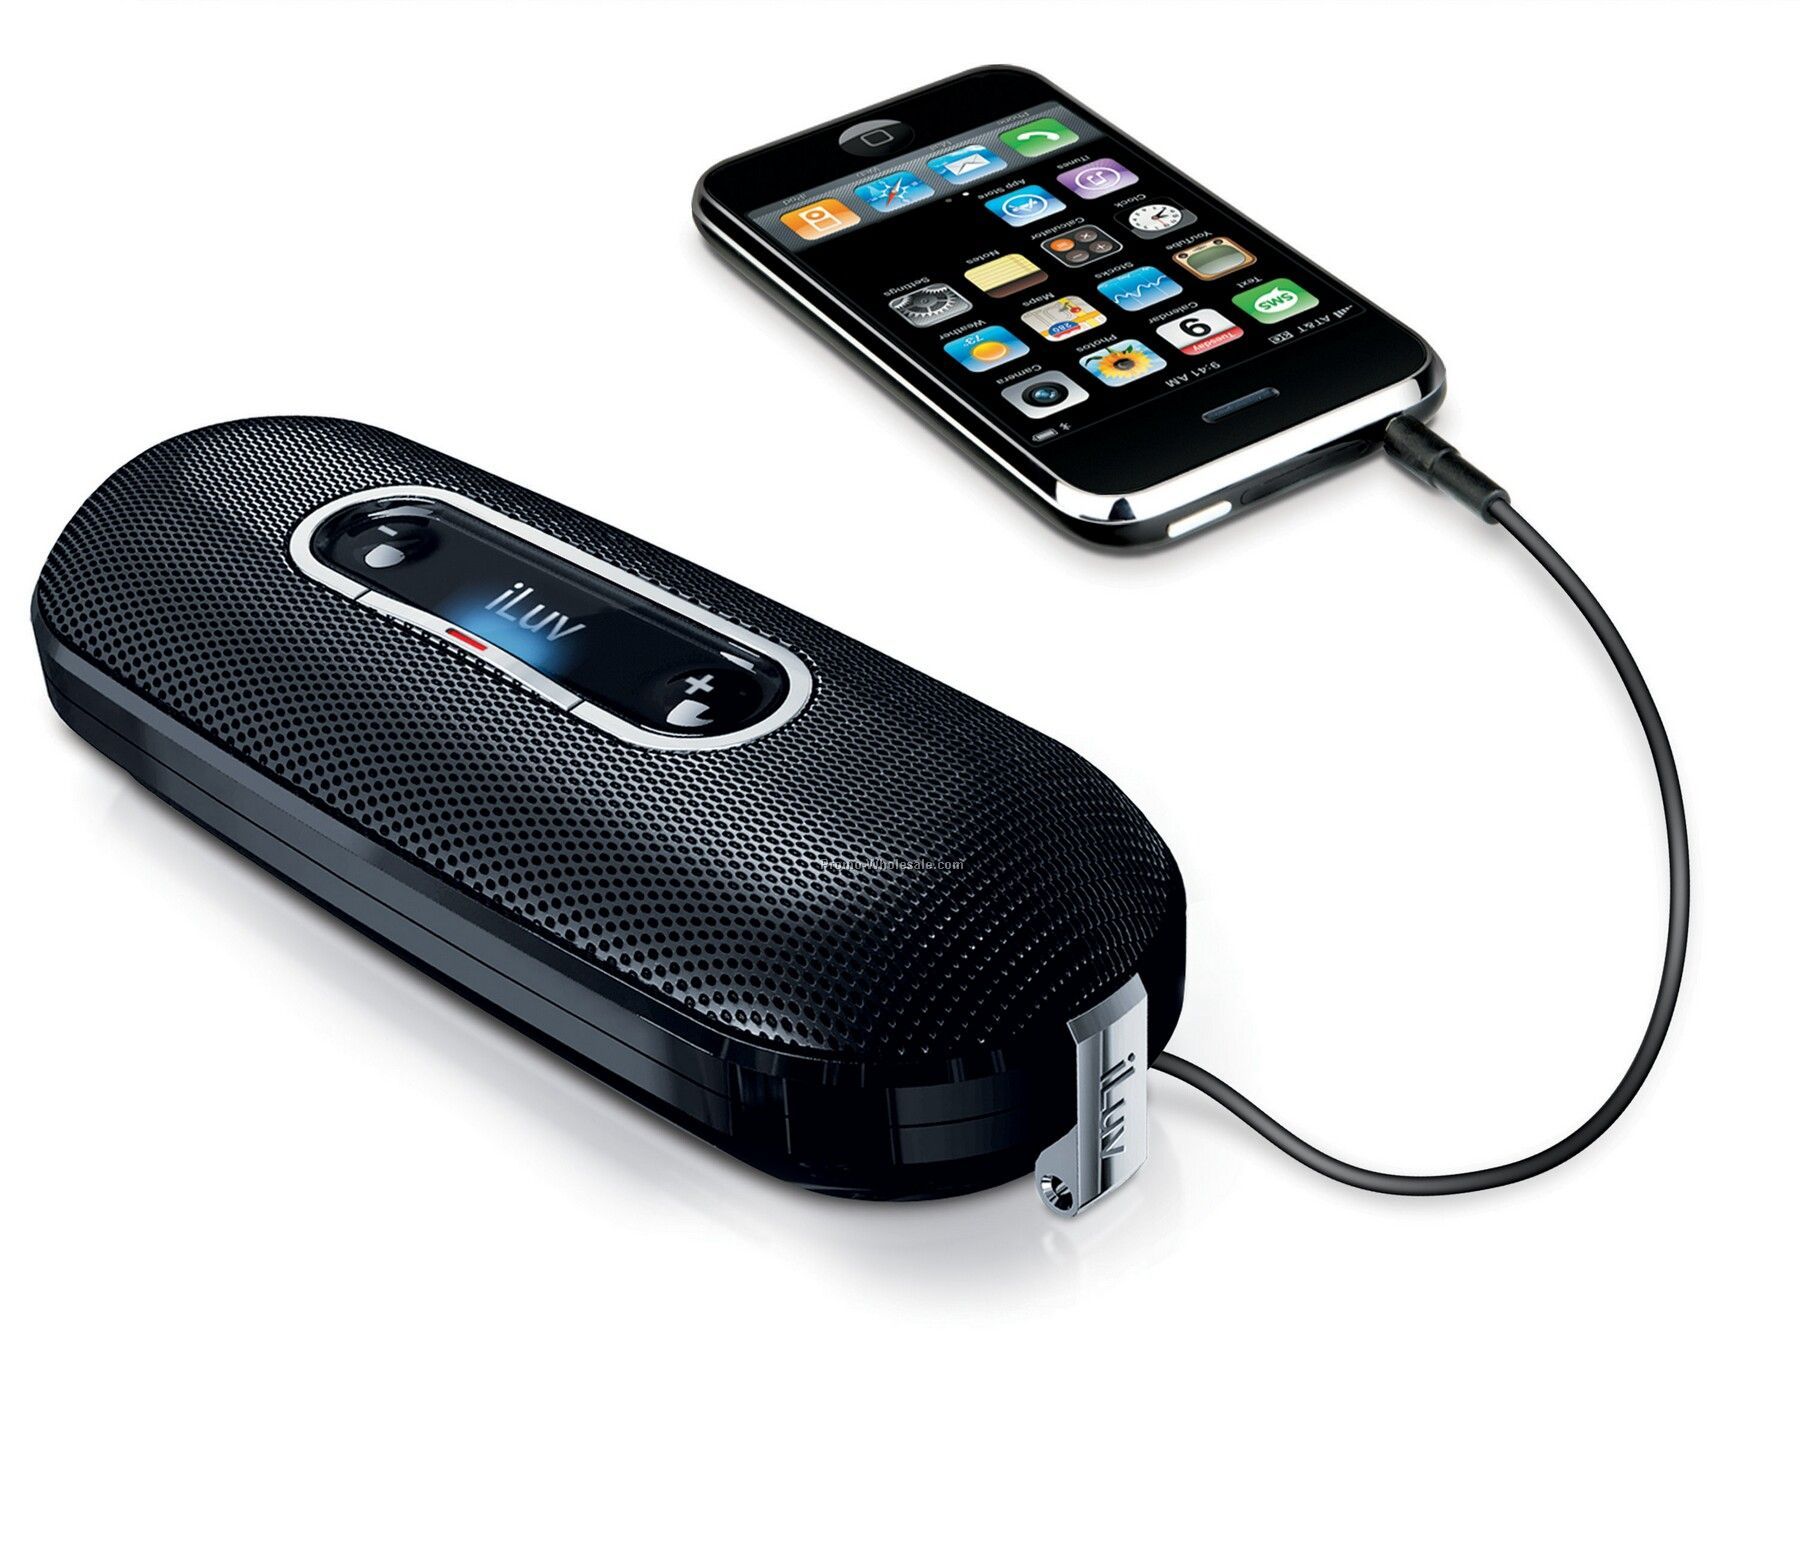 Iluv Portable Speaker For Mp3 Players And Ipod - Black